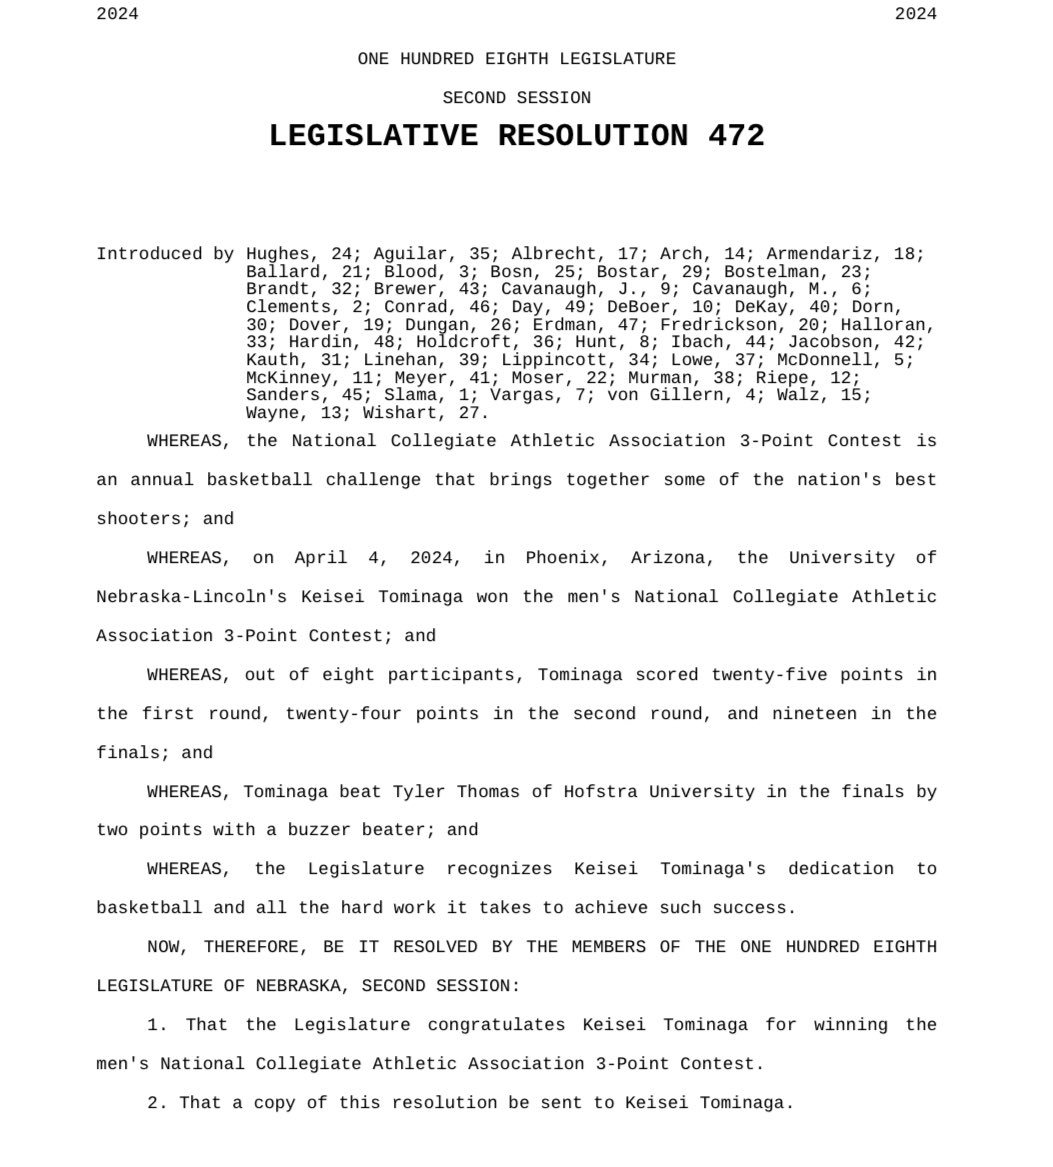 Keisei Tominaga’s legend continues. The #Husker sensation brings together politicians from all sides in this #neleg resolution celebrating his title as greatest 3-point shooter maybe ever.